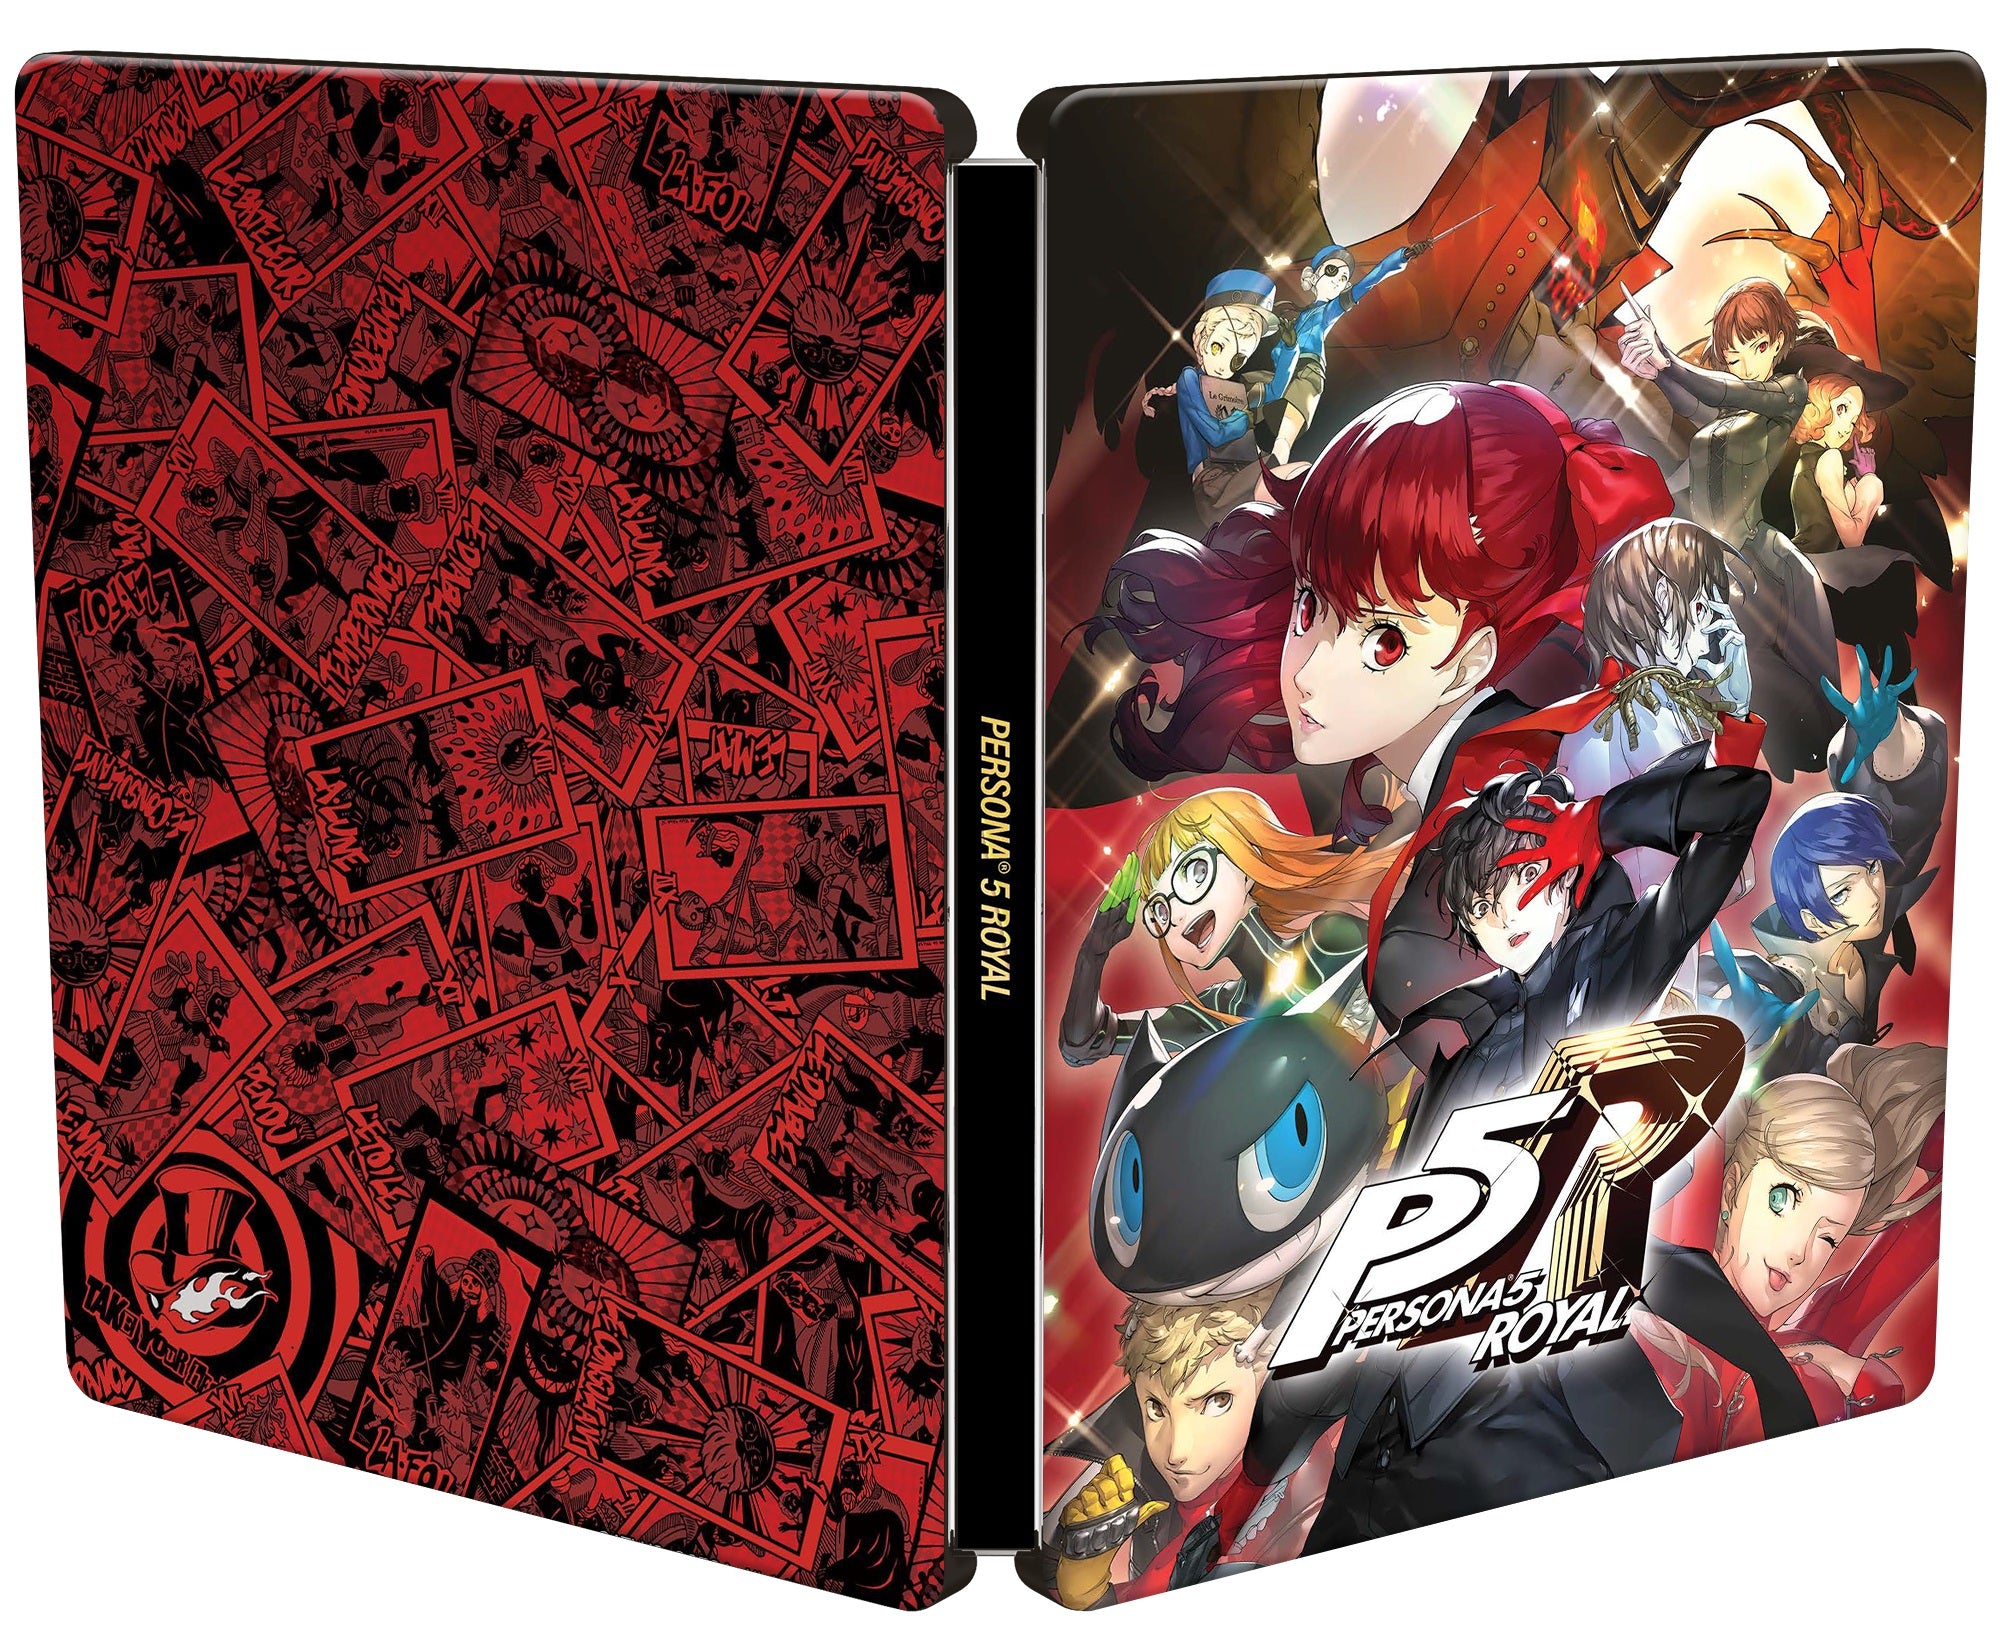 Persona 5 Remastered - Limited Steelbook Edition